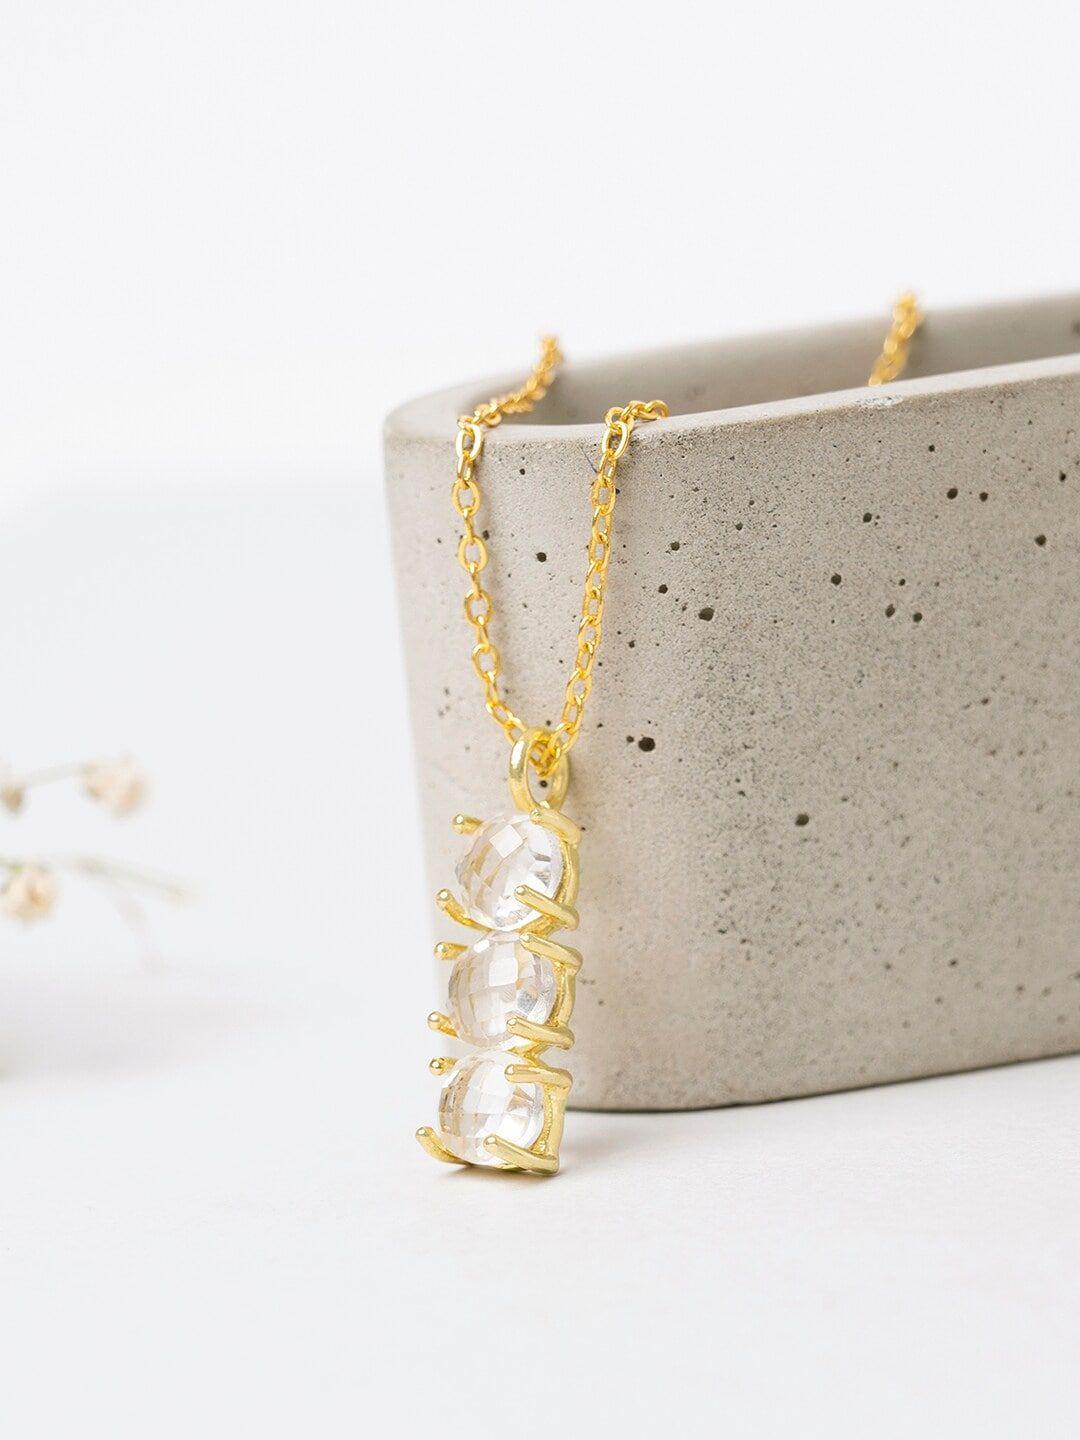 mikoto by fablestreet transparent gold-plated april birthstone crystal necklace